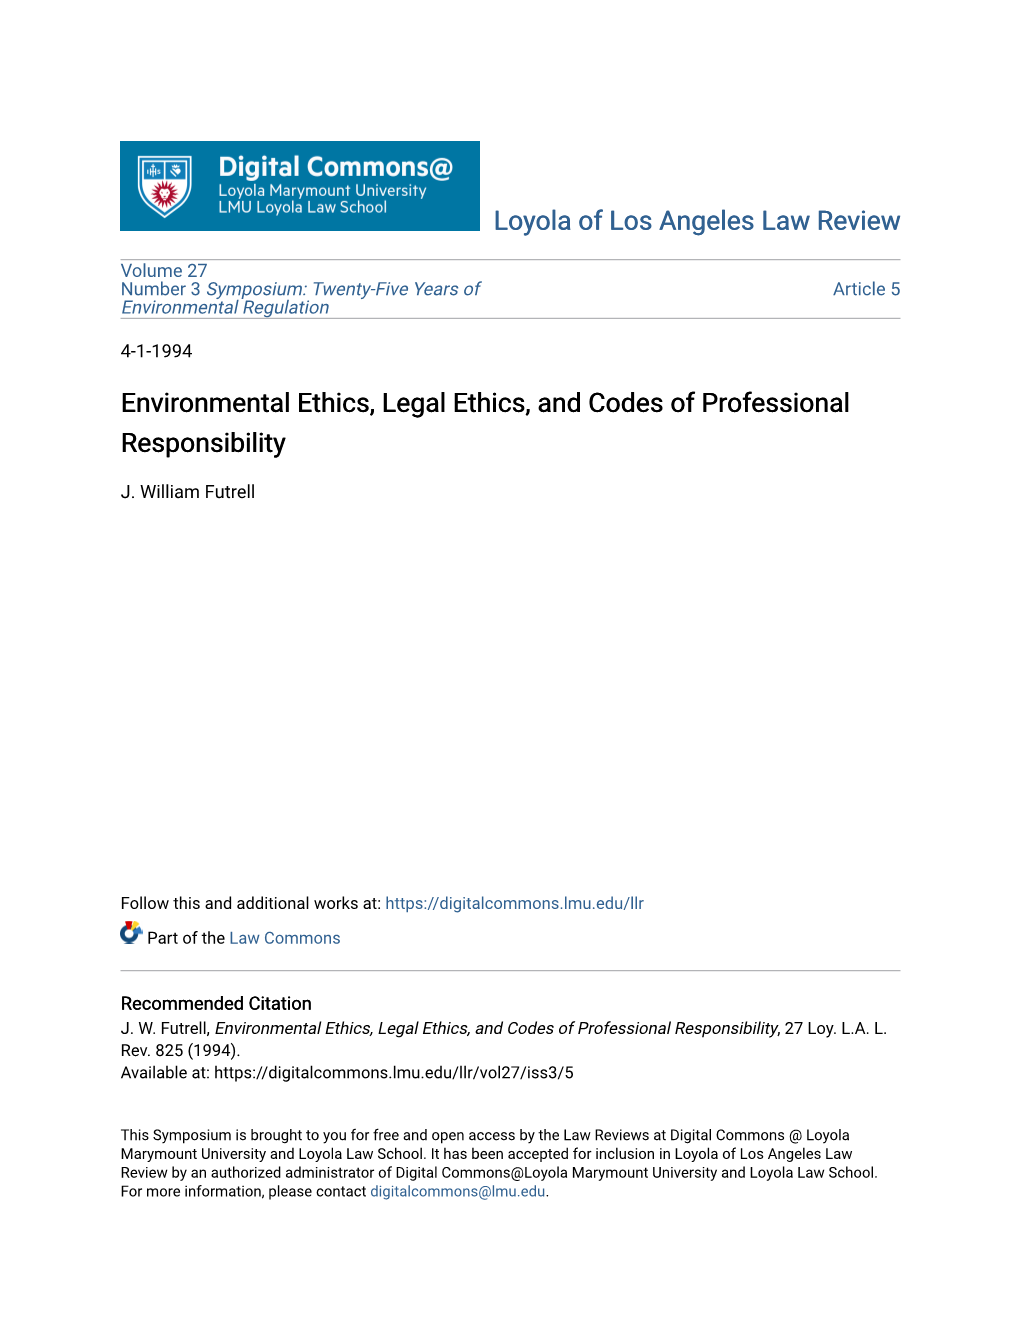 Environmental Ethics, Legal Ethics, and Codes of Professional Responsibility